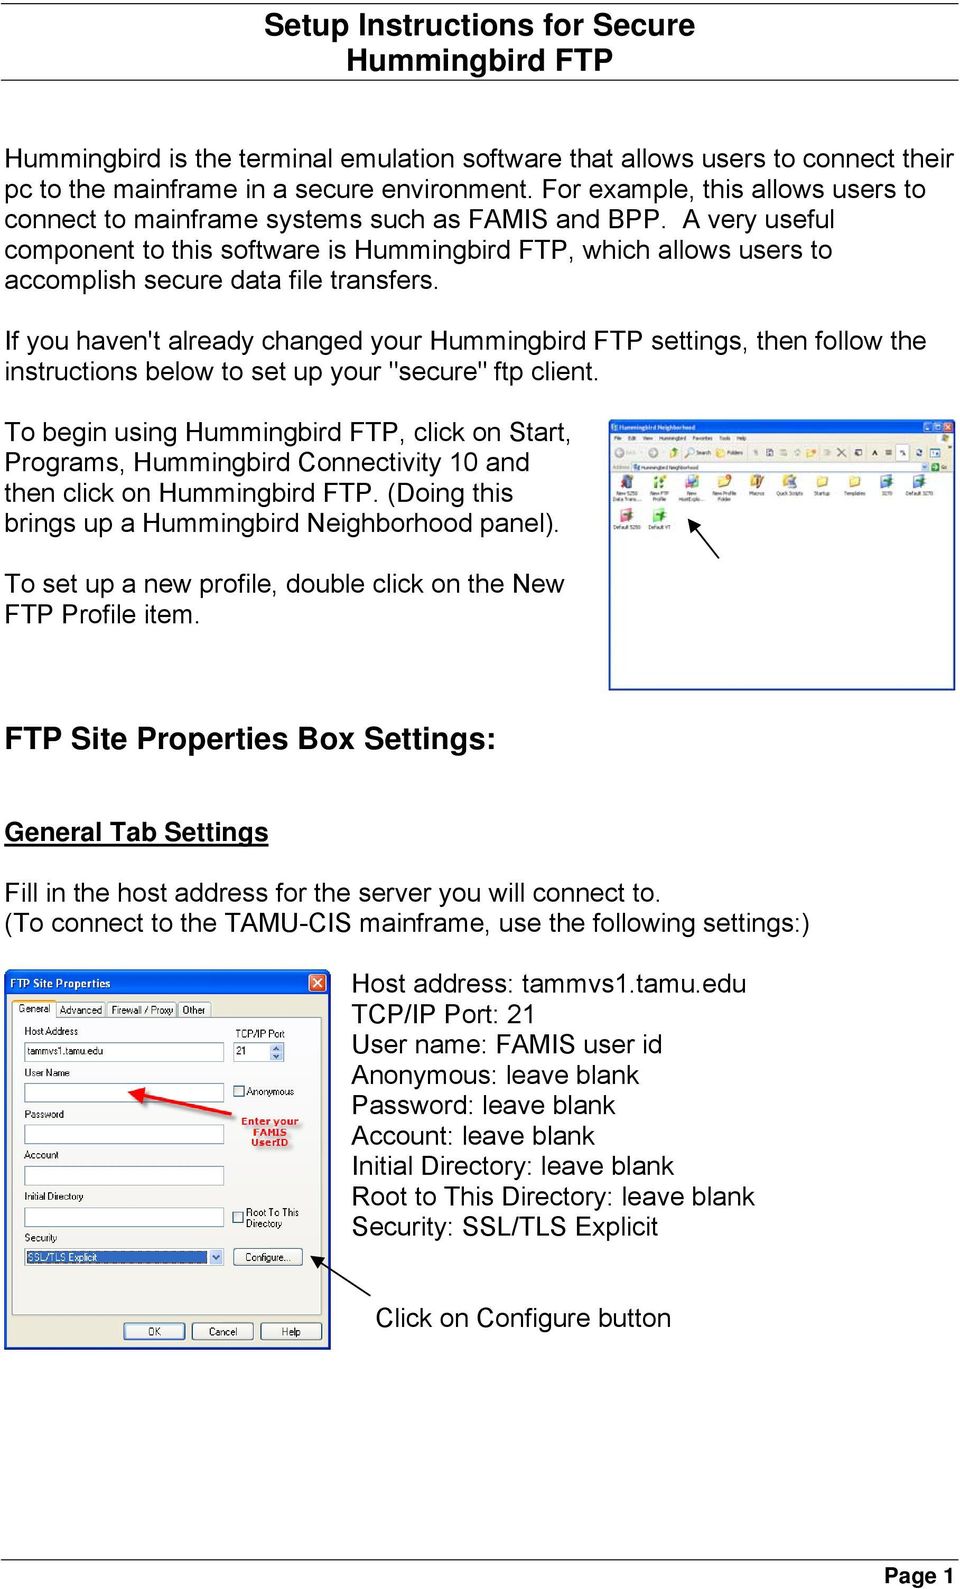 If you haven't already changed your settings, then follow the instructions below to set up your "secure" ftp client.